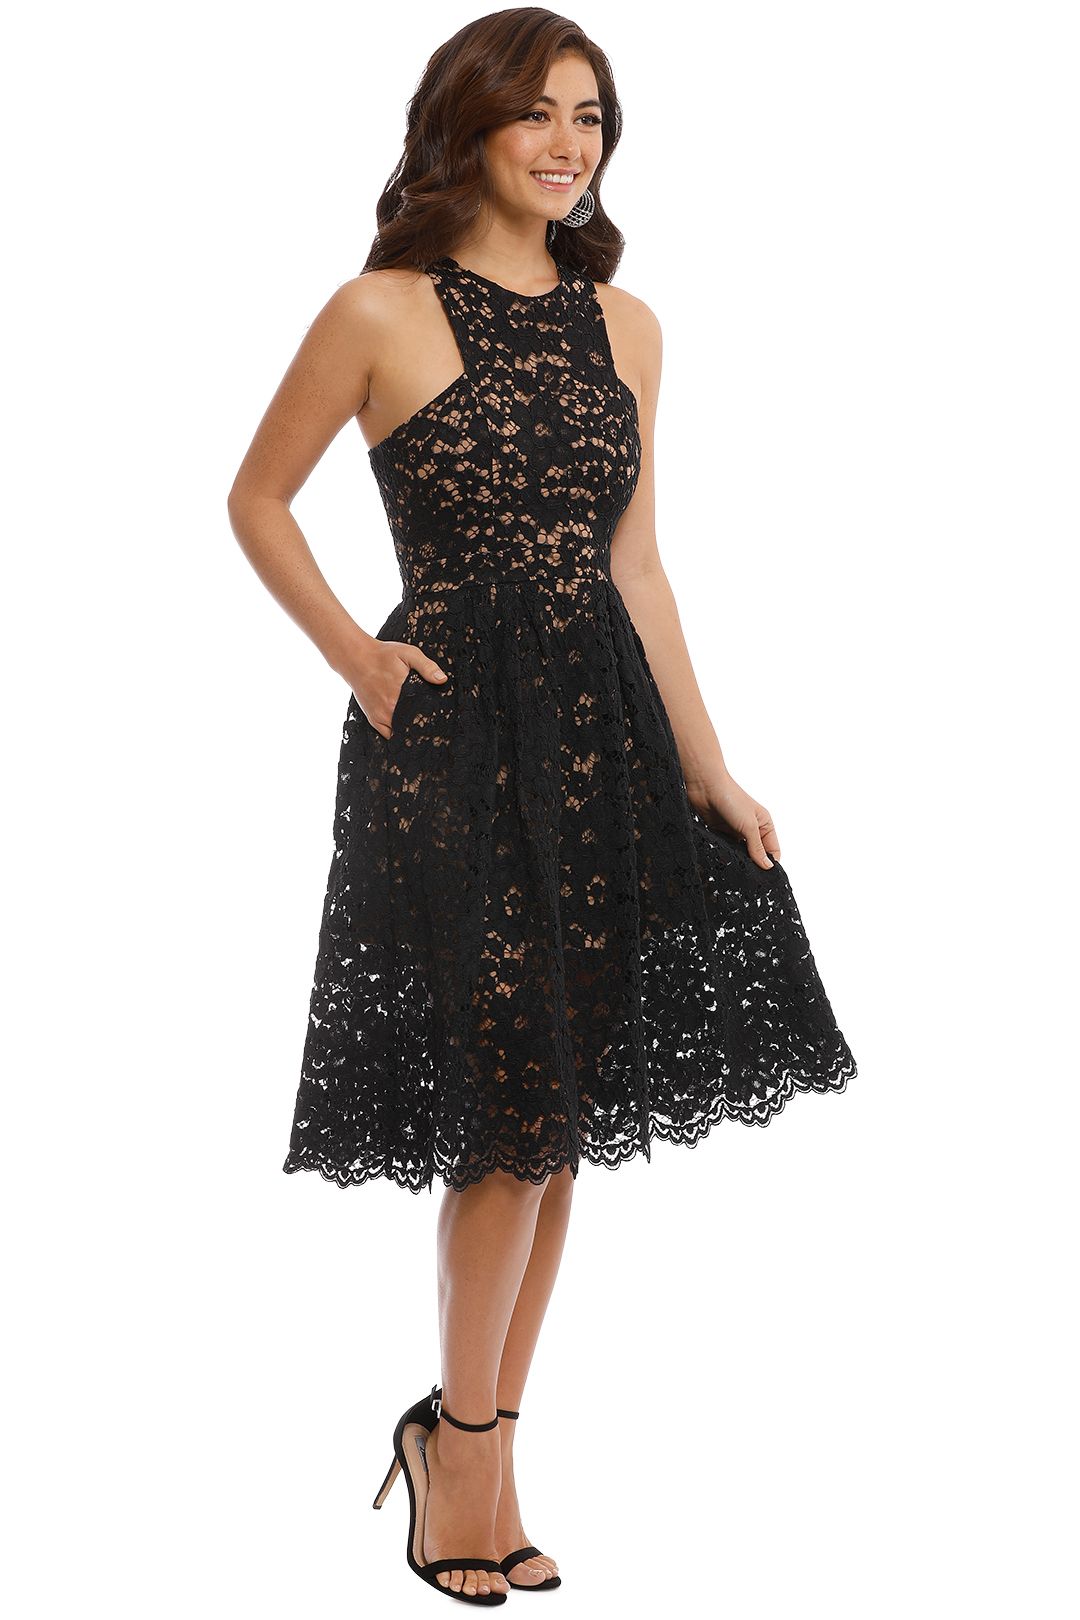 Embrace Floaty Midi in Black by Grace & Hart for Hire